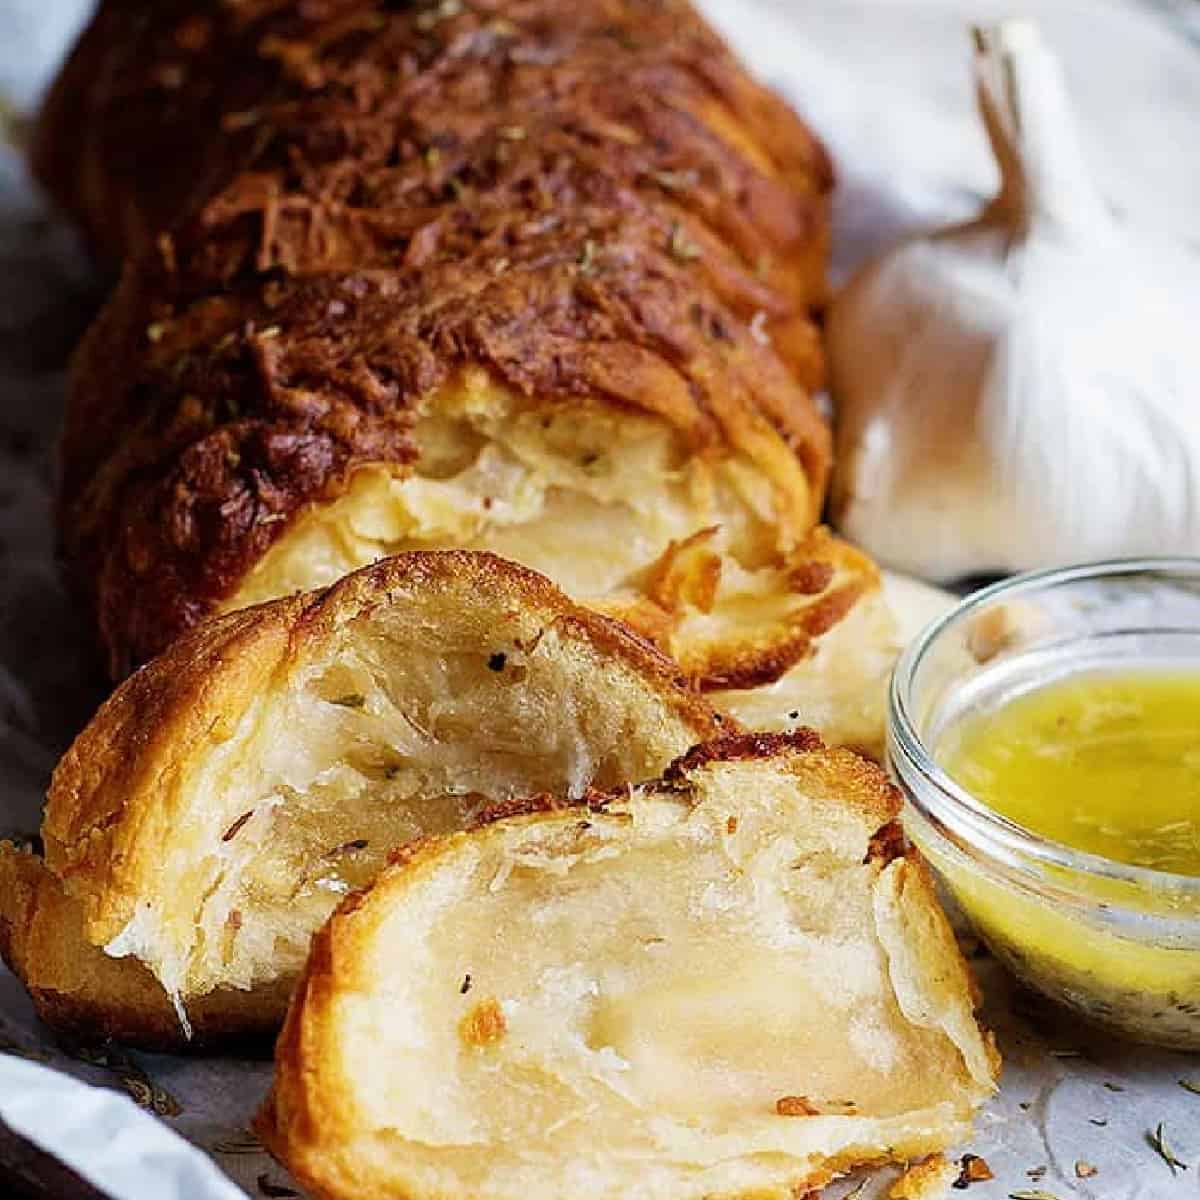 Easy Garlic Cheese Pull Apart Bread is a great appetizer or side and can be made in minutes. Adding lots of garlic and cheese make this bread so delicious. There's no way one bite would be enough!
